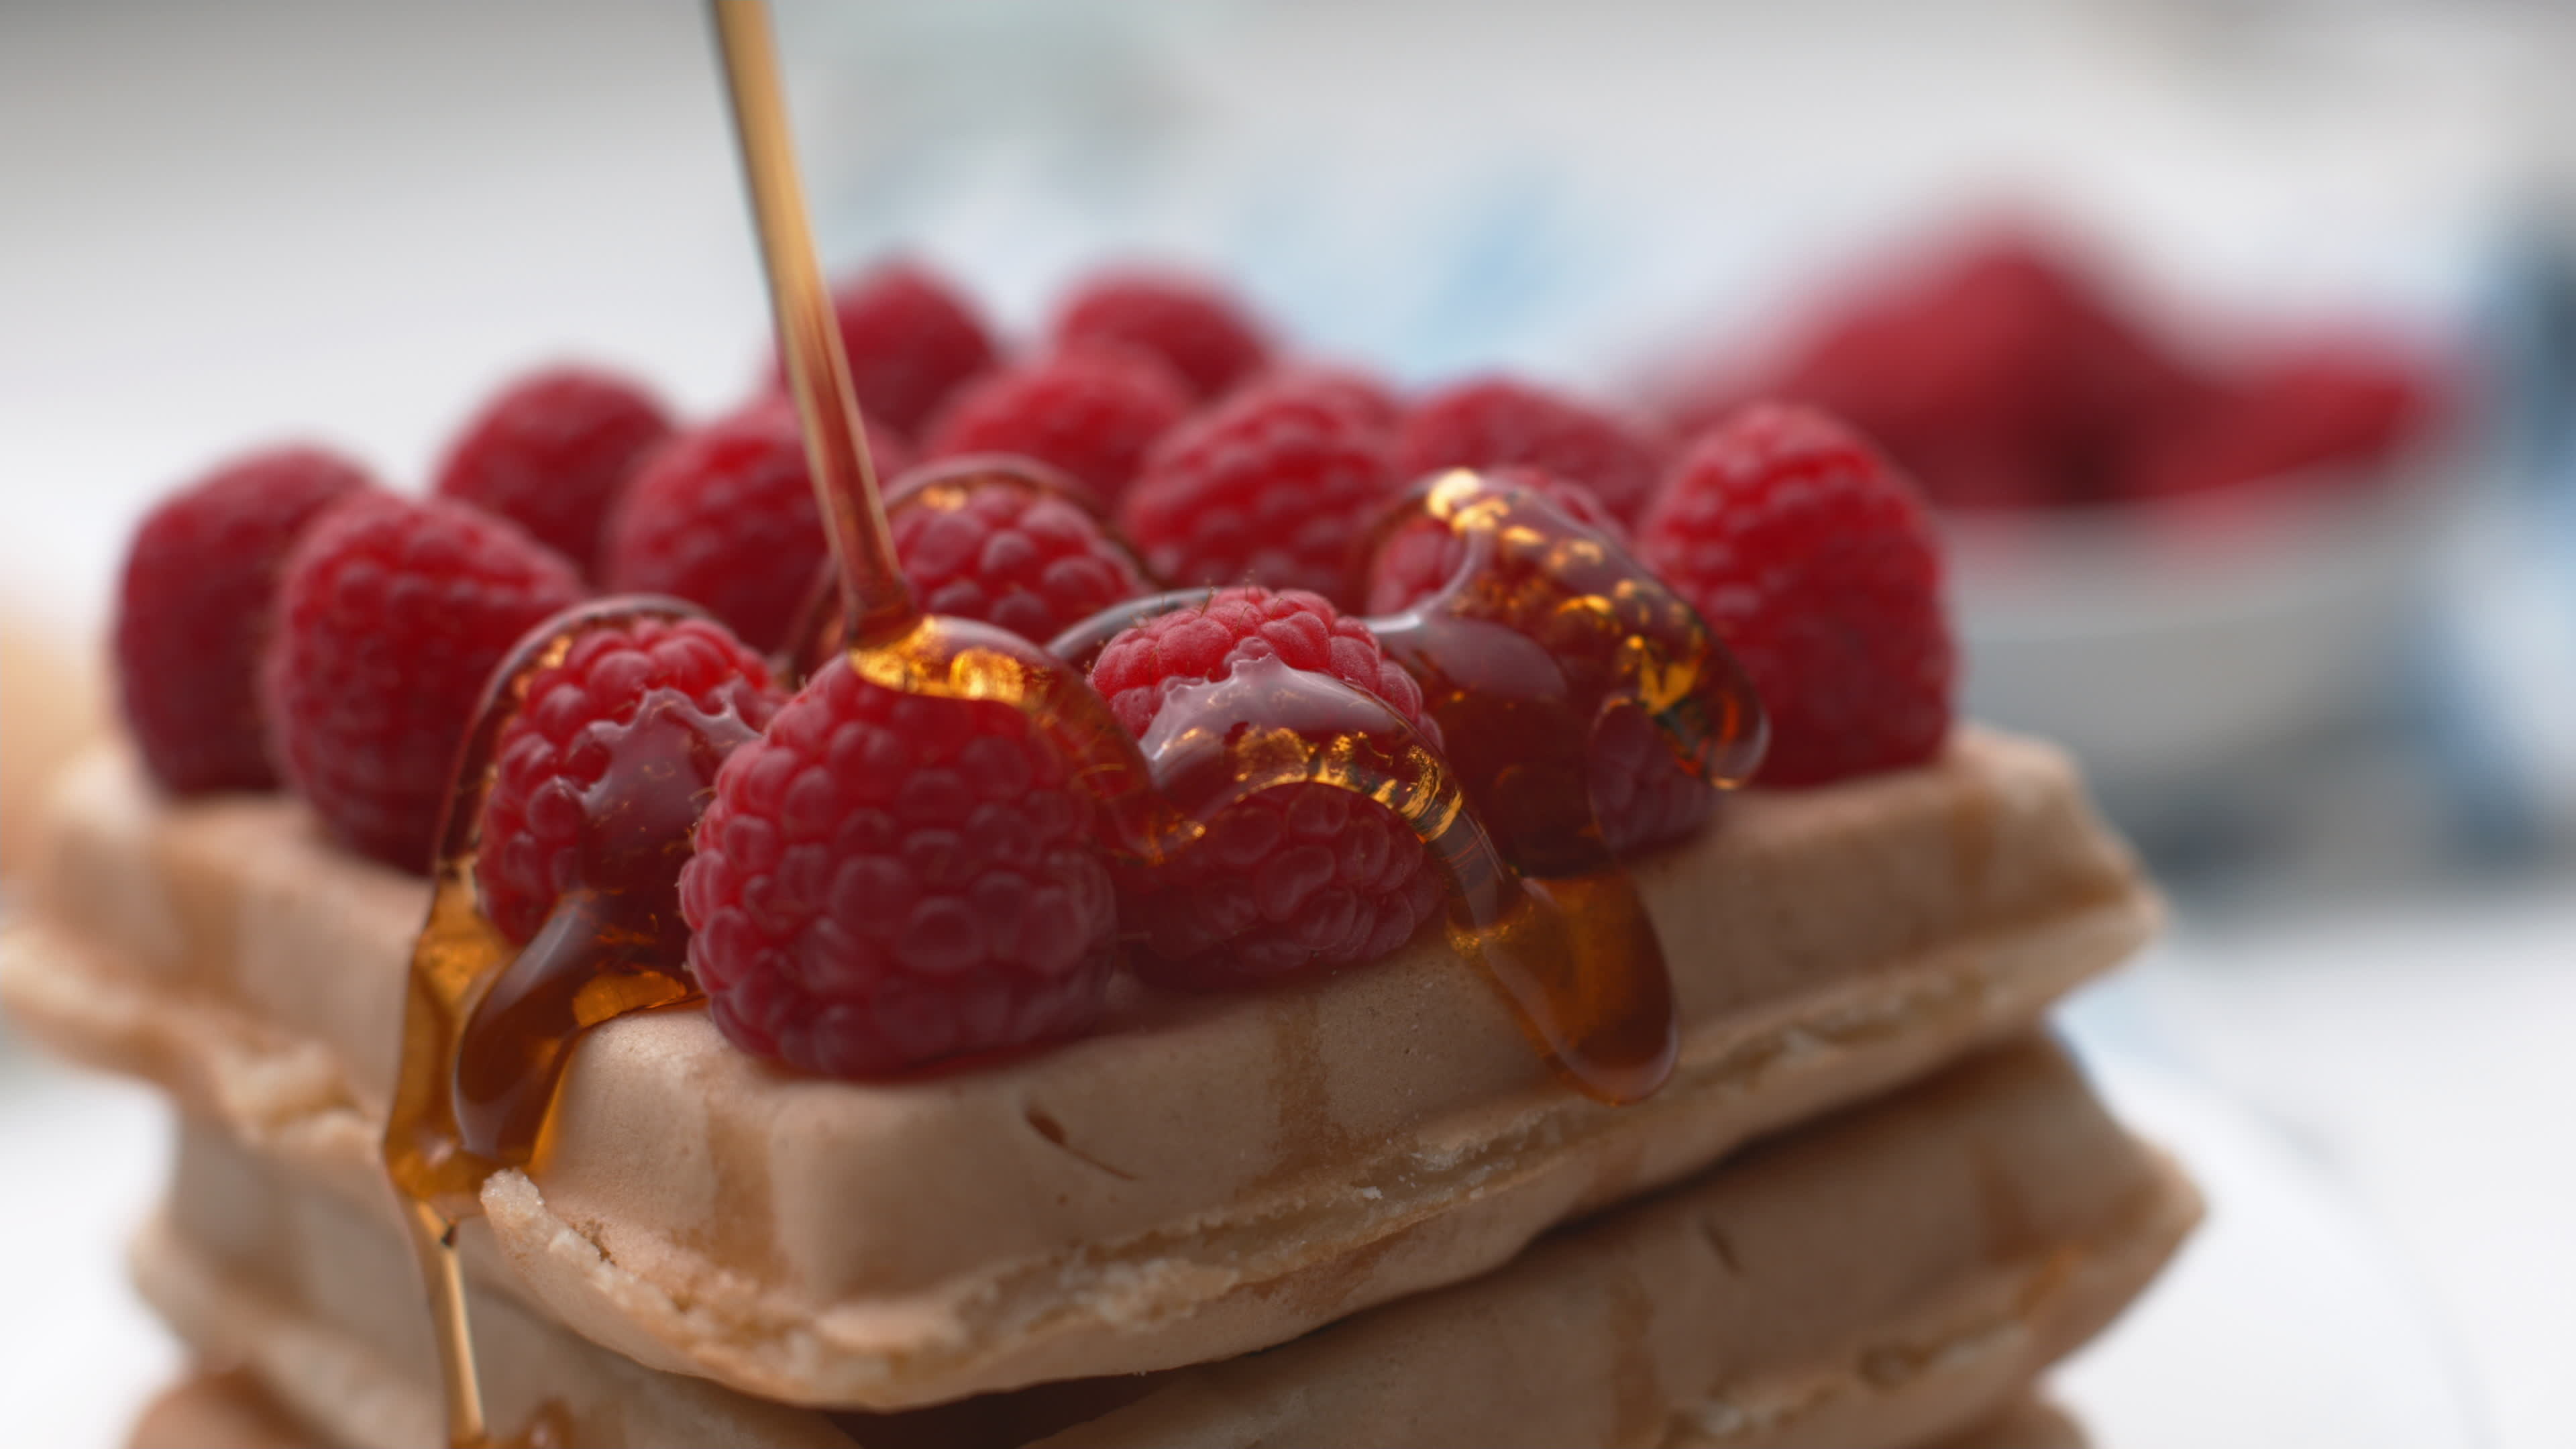 Syrup on waffles, Berries and sweetness, Slow-motion video, Tempting treat, 3840x2160 4K Desktop